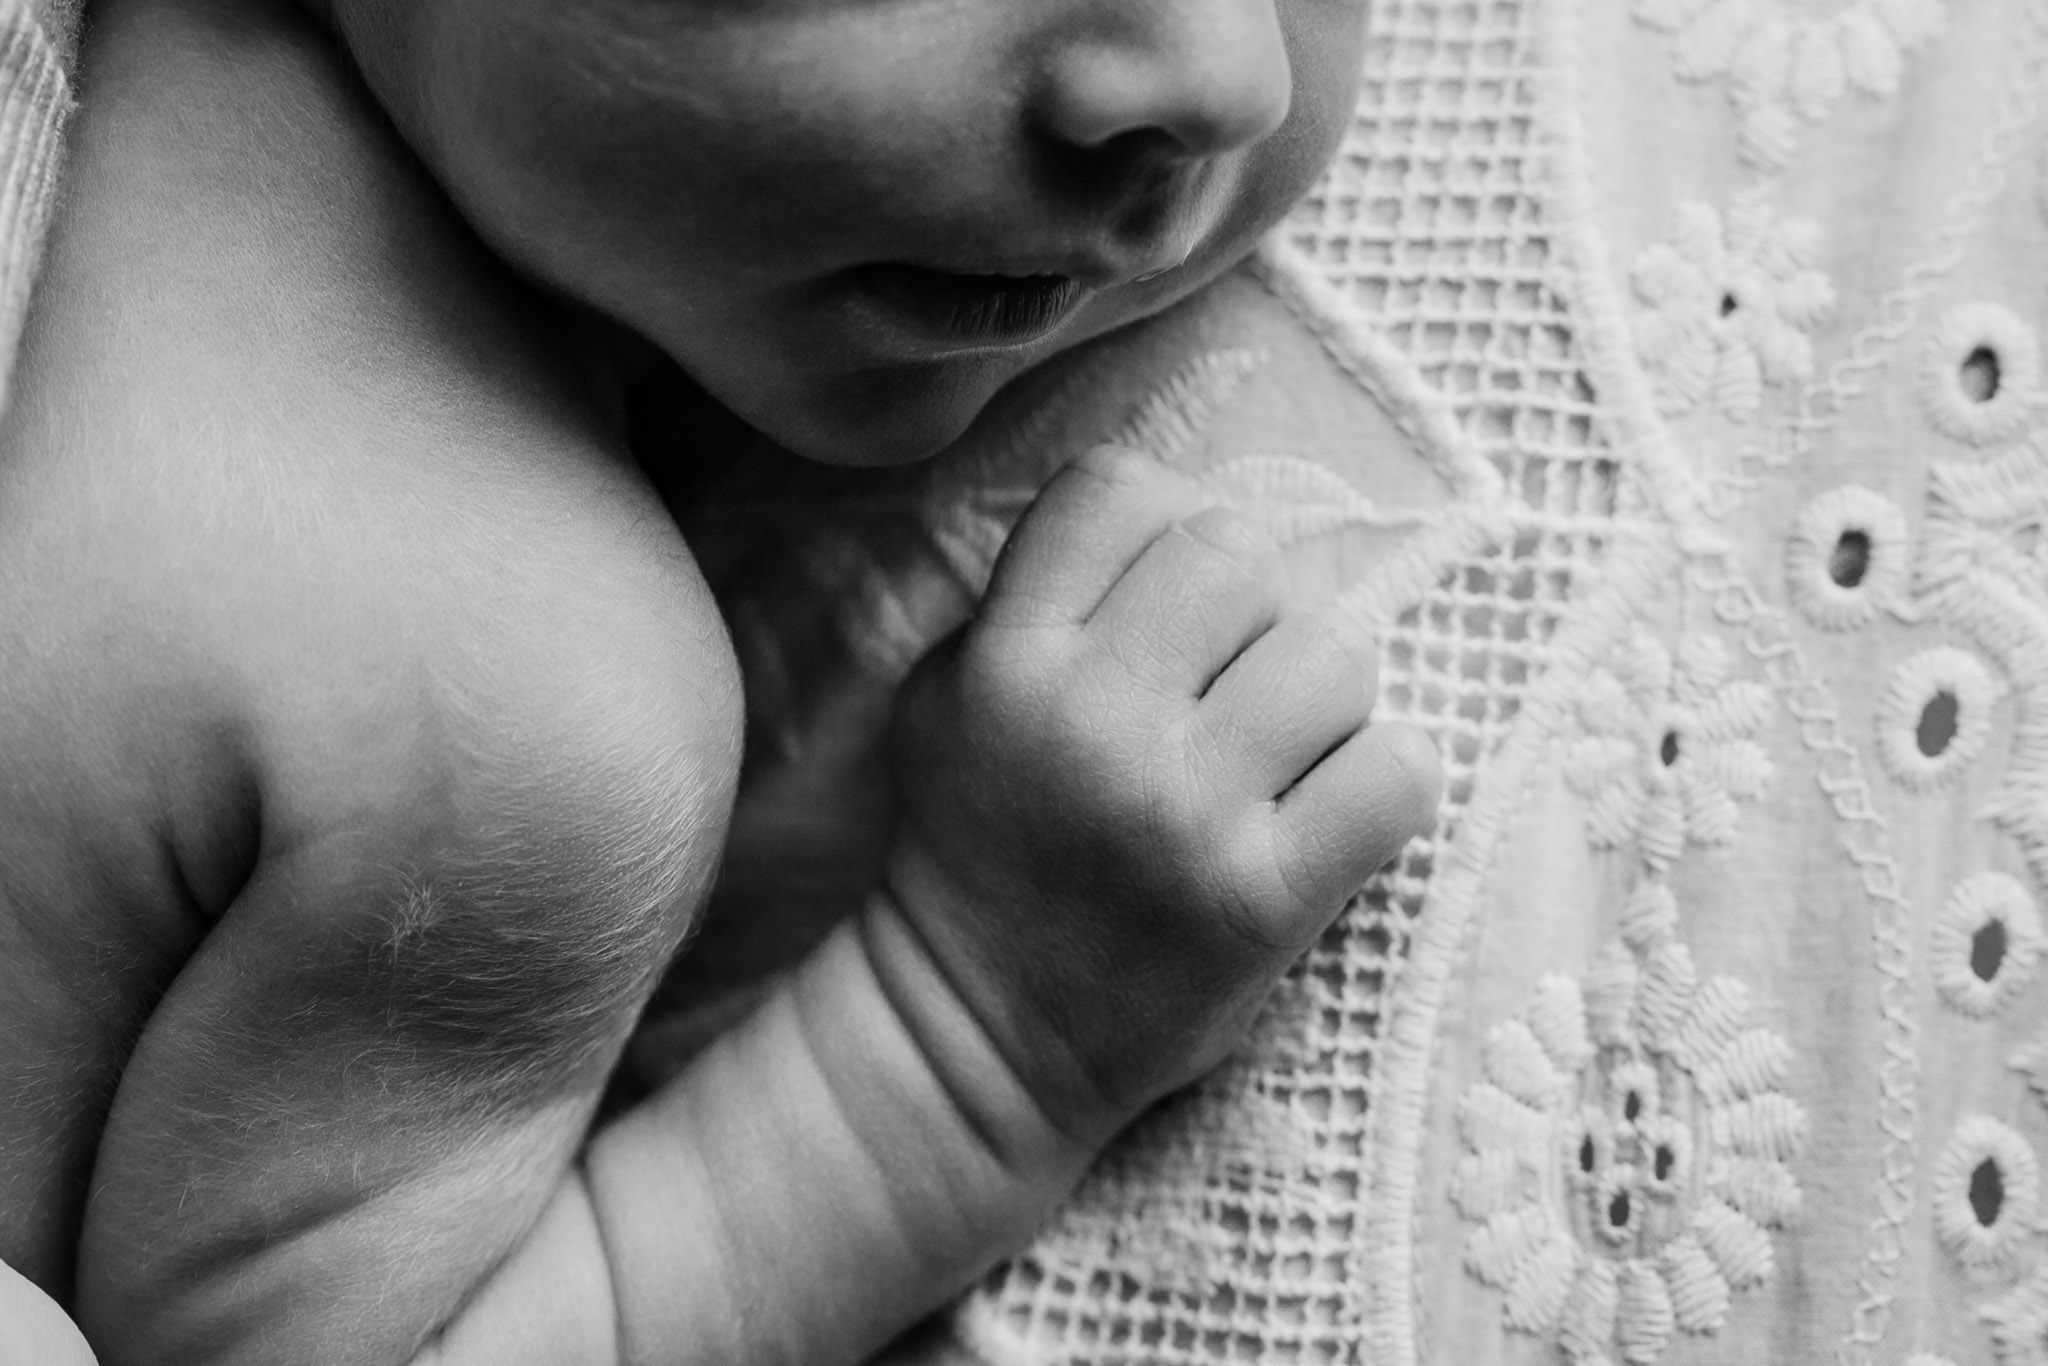 Durham Newborn Photographer | By G. Lin Photography | Black and white photo of baby's hands